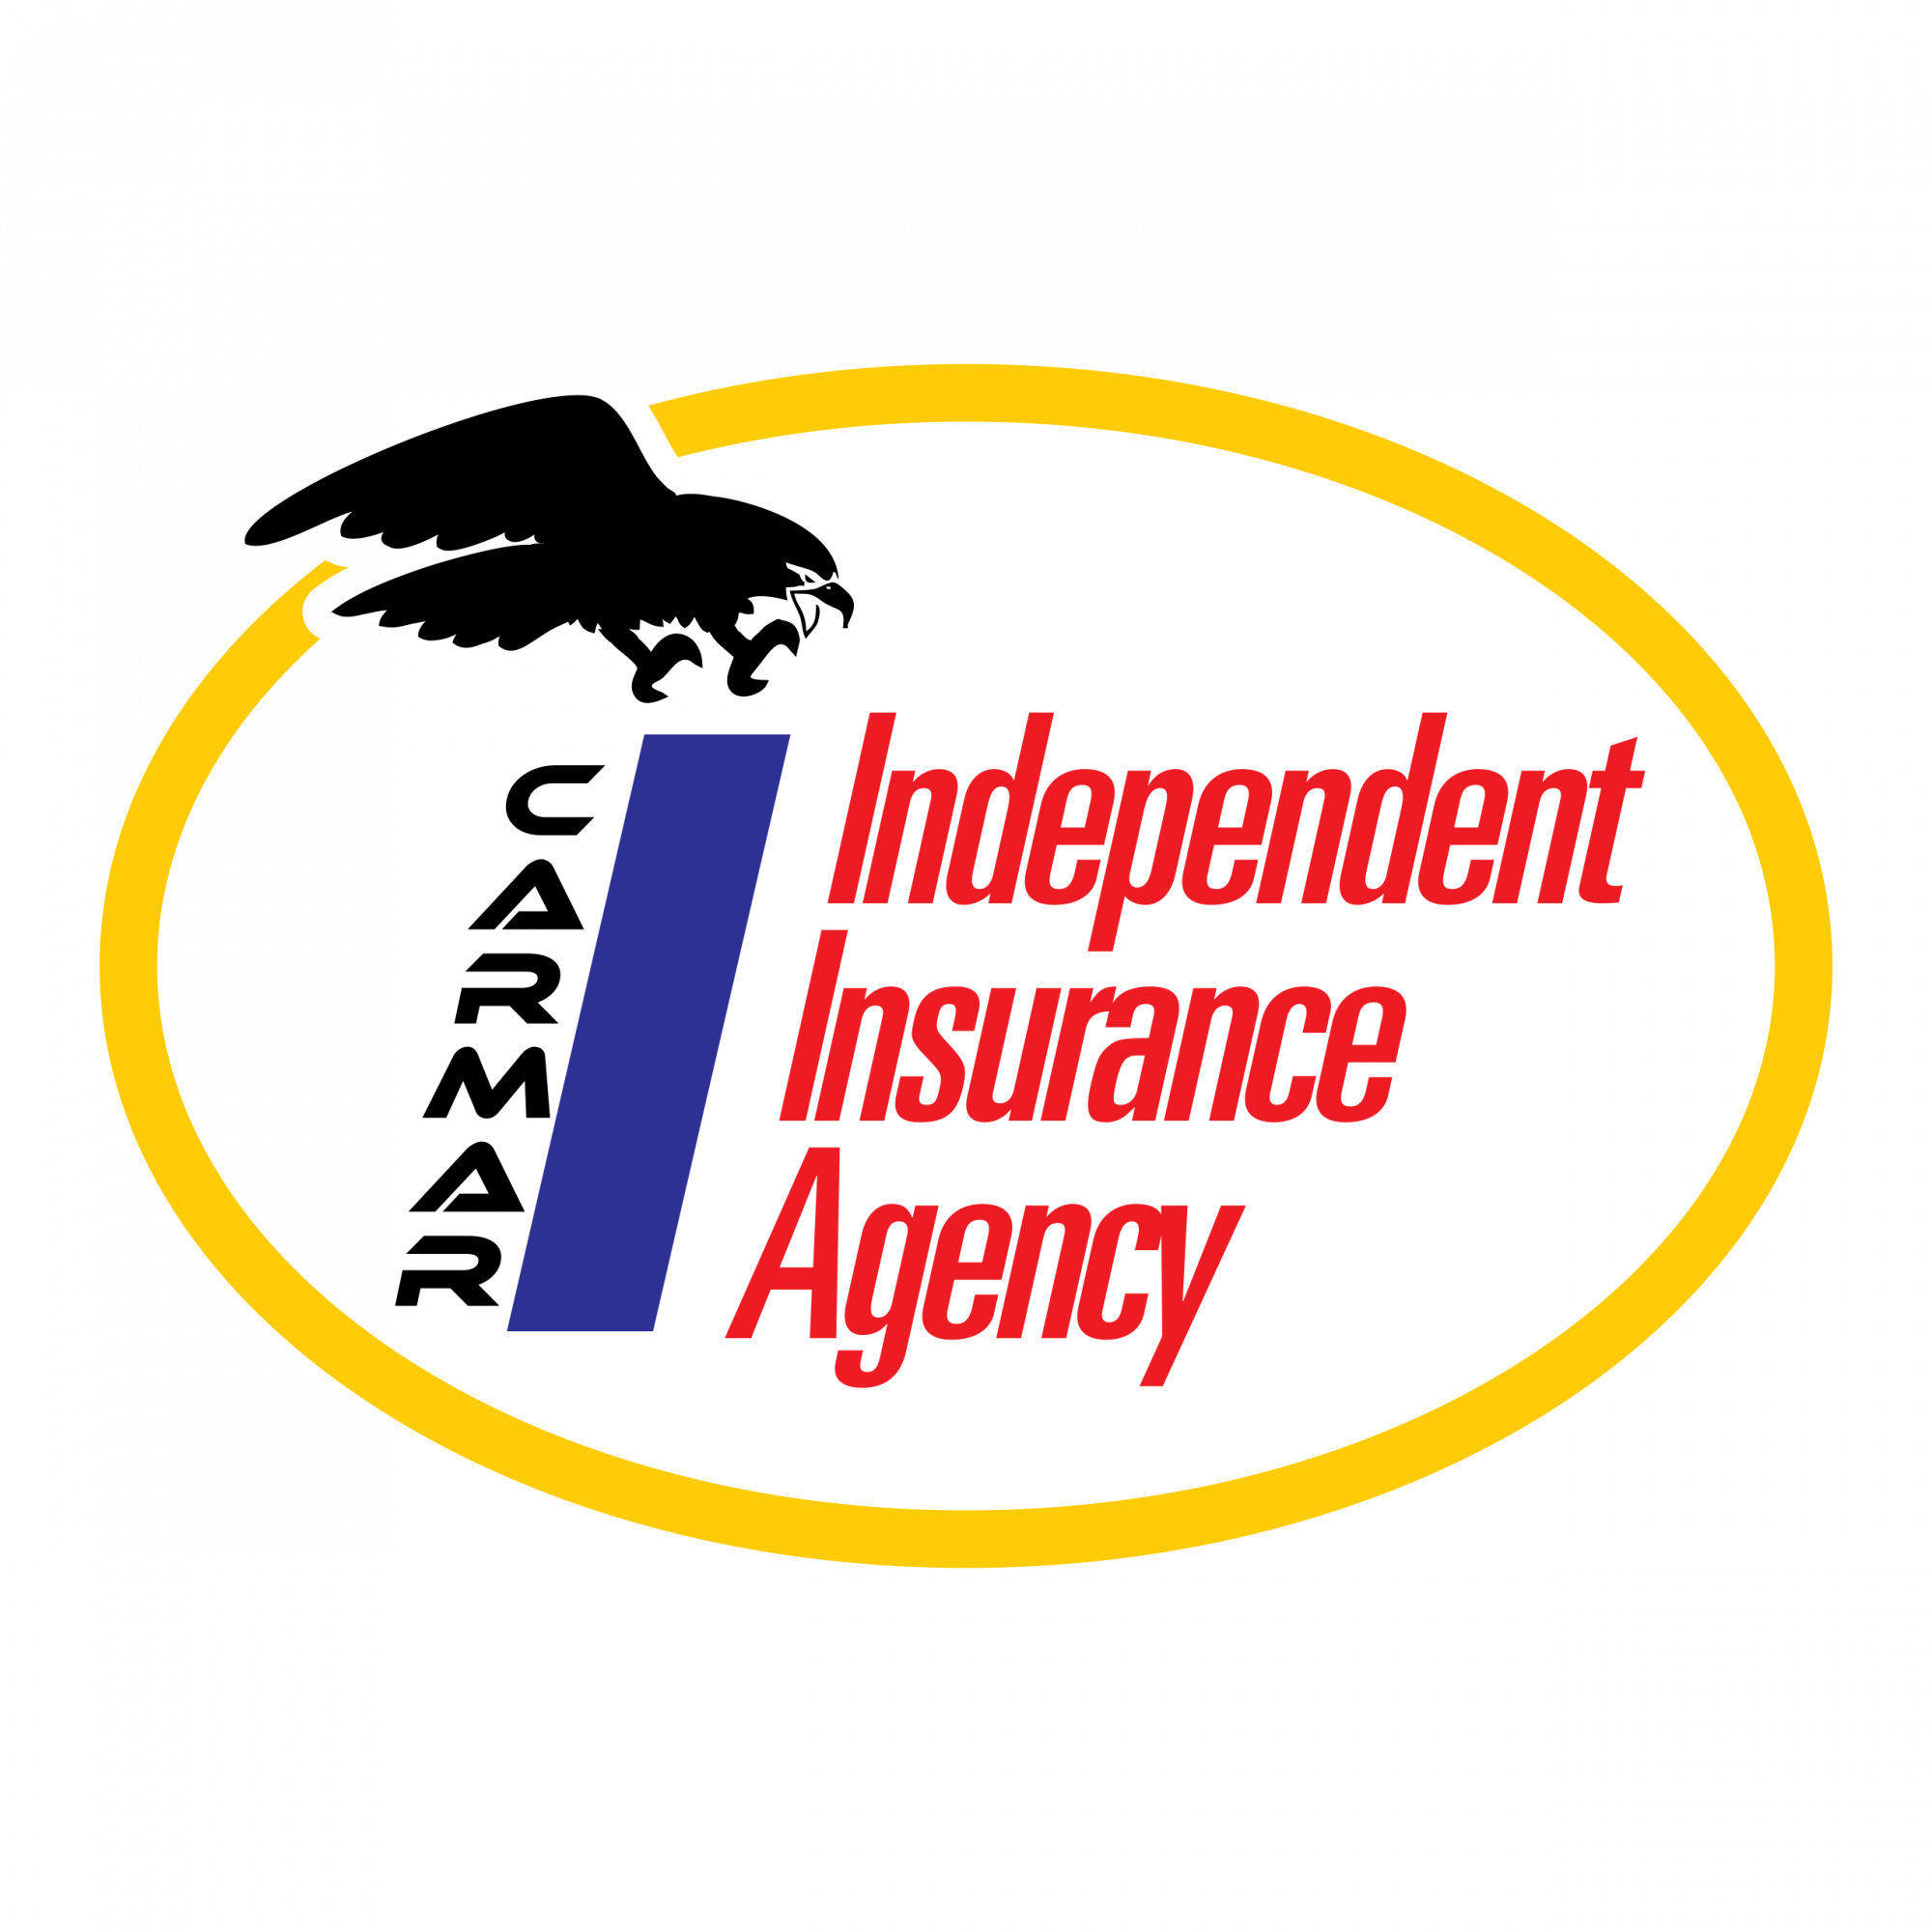 Carmar Insurance Agency - About Us